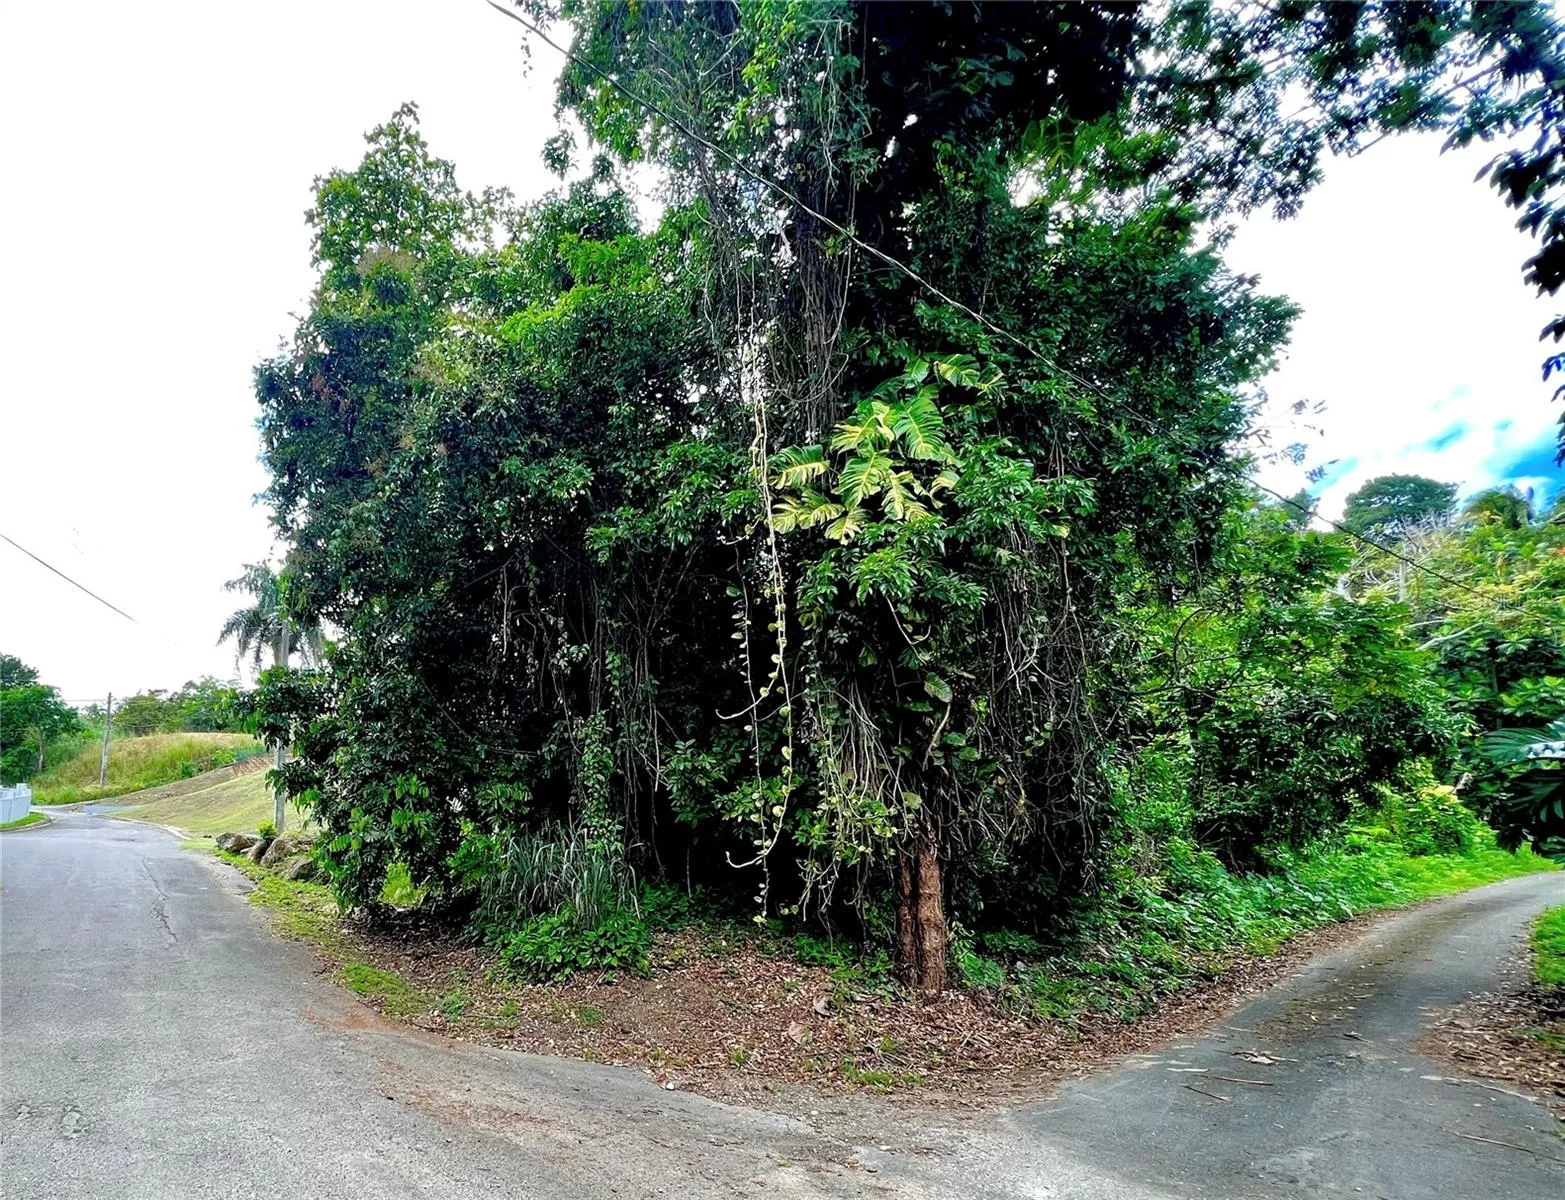 142 St. KM 5.9 INT. BO. RÍO LAJAS, Toa Alta, Puerto Rico 00953, ,Land,For Sale,KM 5.9 INT. BO. RÍO LAJAS,PR9105866